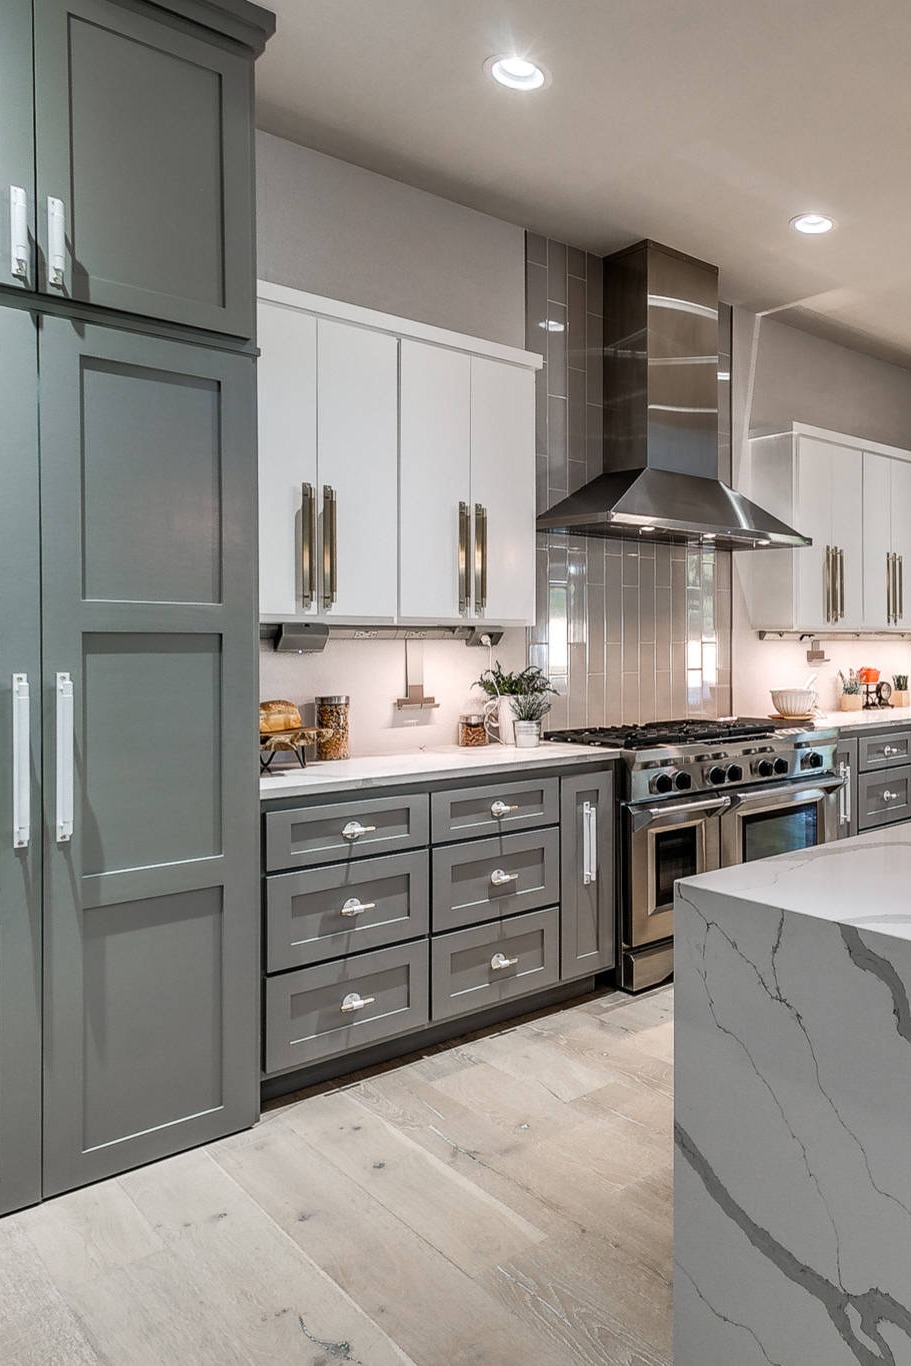 Light Gray Cabinets Gray Kitchen Cabinets Grey Cabinets Dark Gray Cabinets Subway Tile Backsplash Light Grey Kitchen Cabinets Flat Panel Cabinets